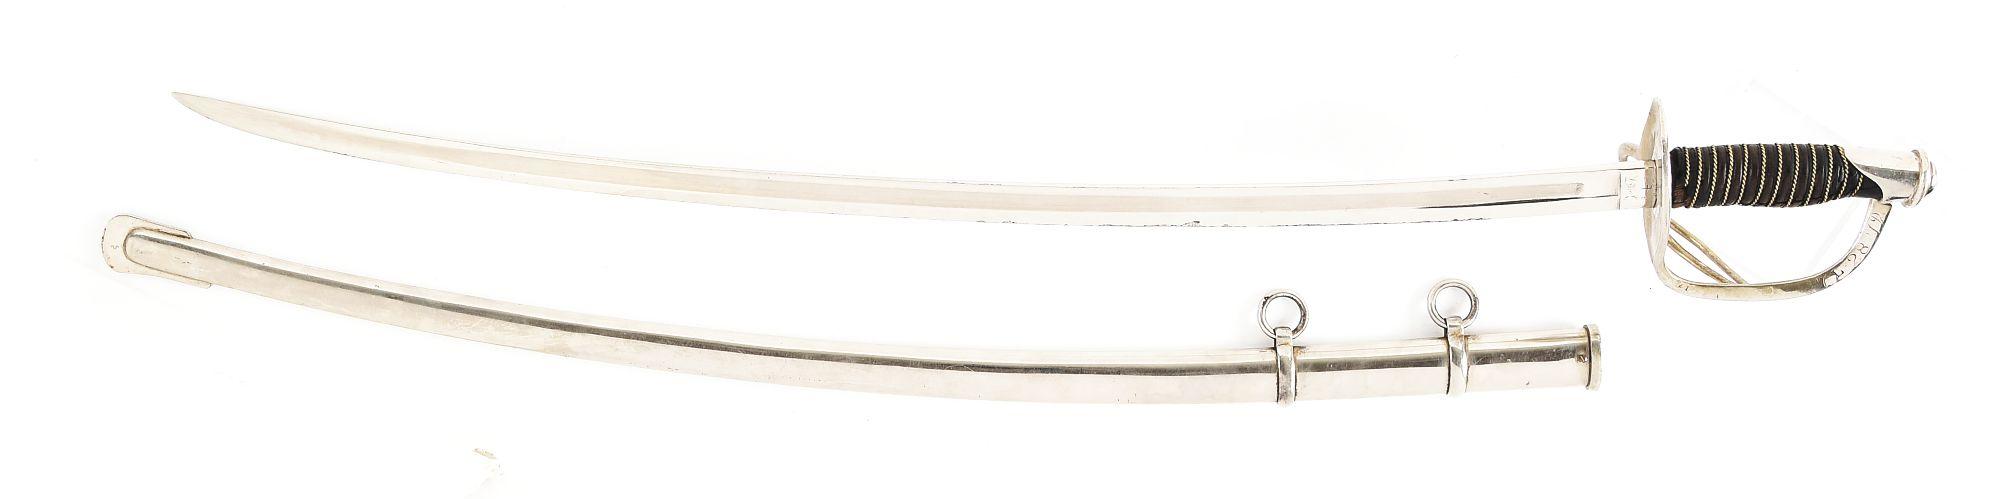 7TH CAVALRY UNIT MARKED MODEL 1860 CAVALRY SABER CARRIED BY EDWARD MATHEY, COMMANDING OFFICER COMPAN